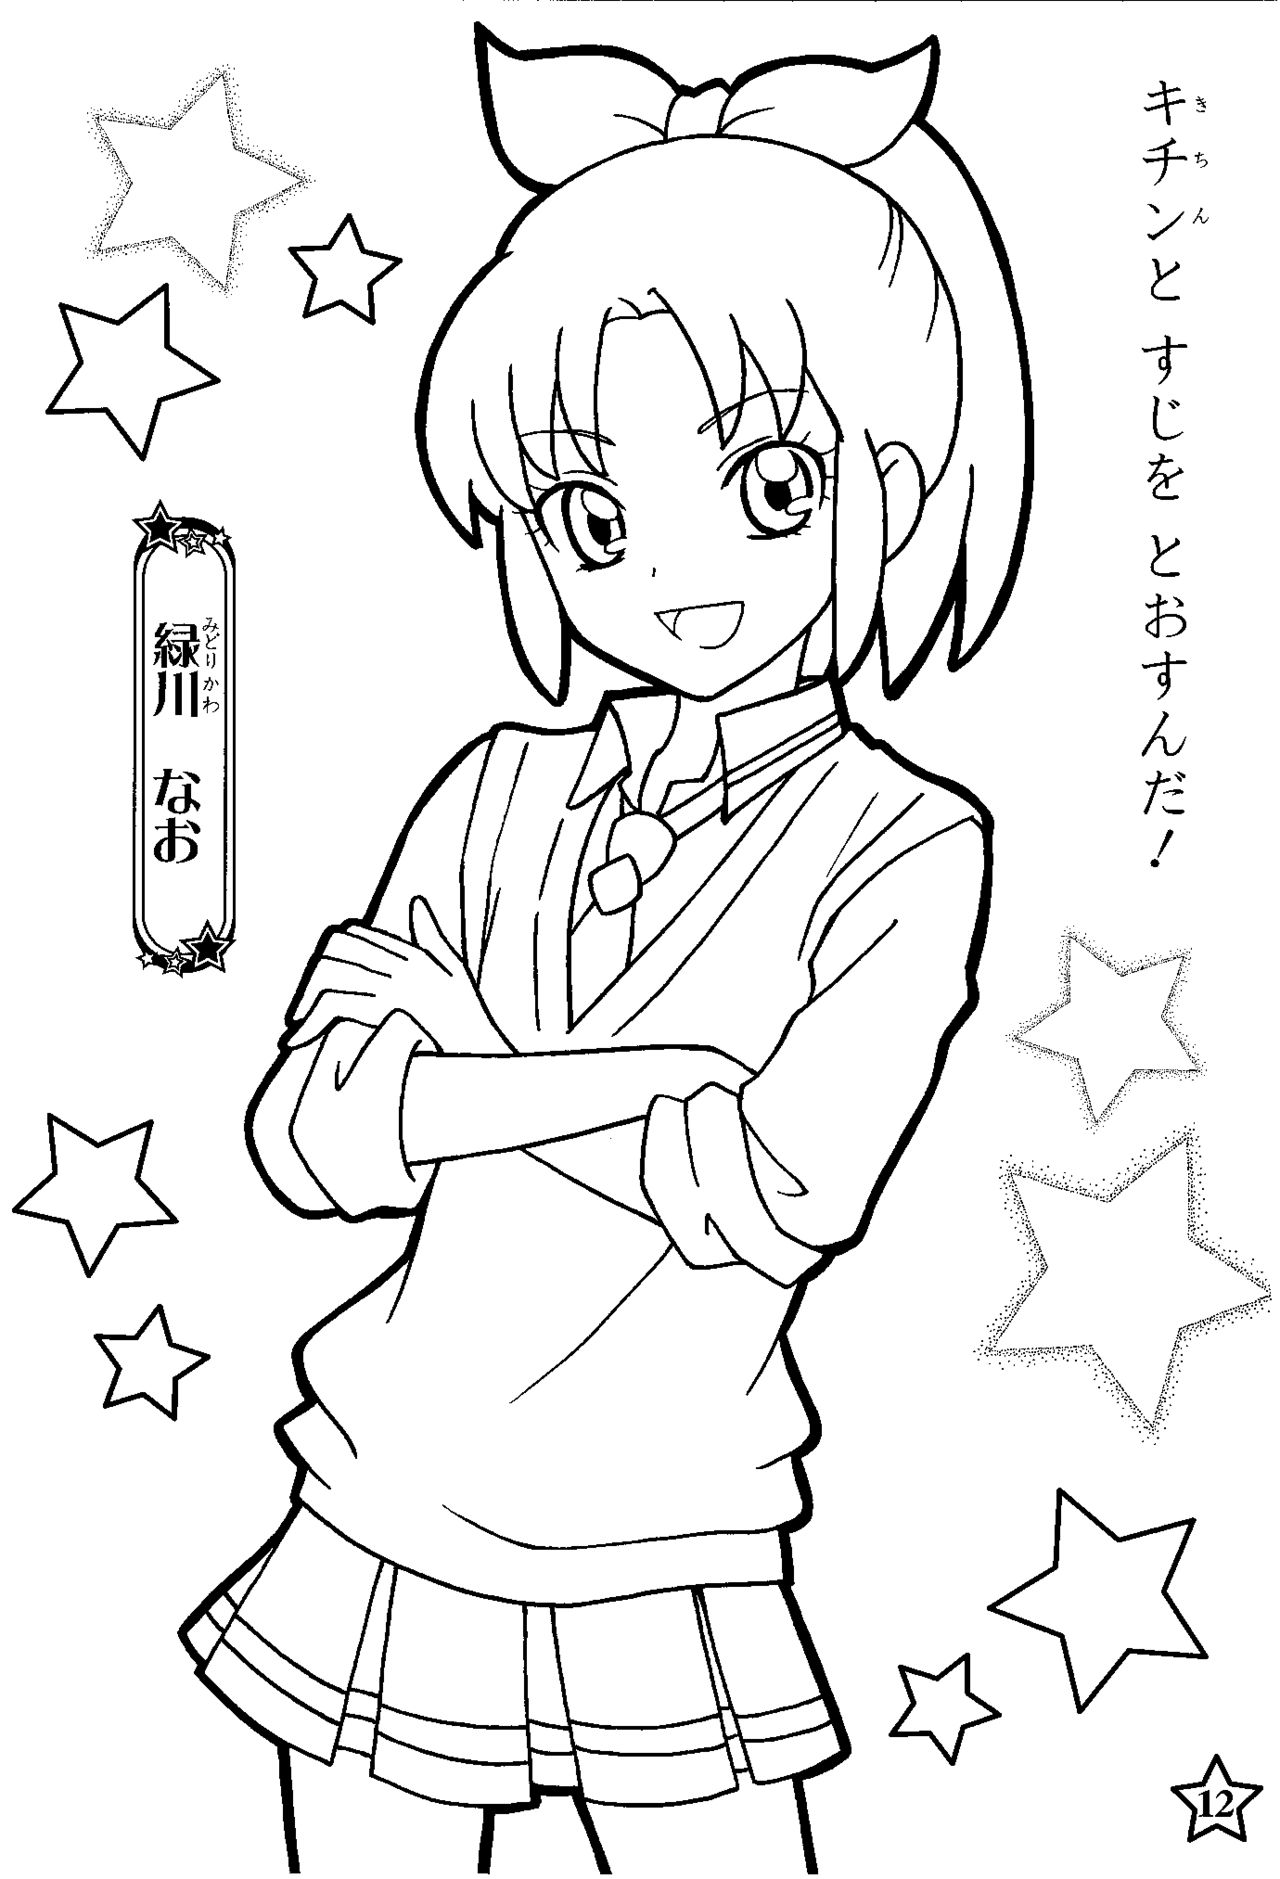 Lovely Nao Midorikawa Coloring Page - Free Printable Coloring Pages for